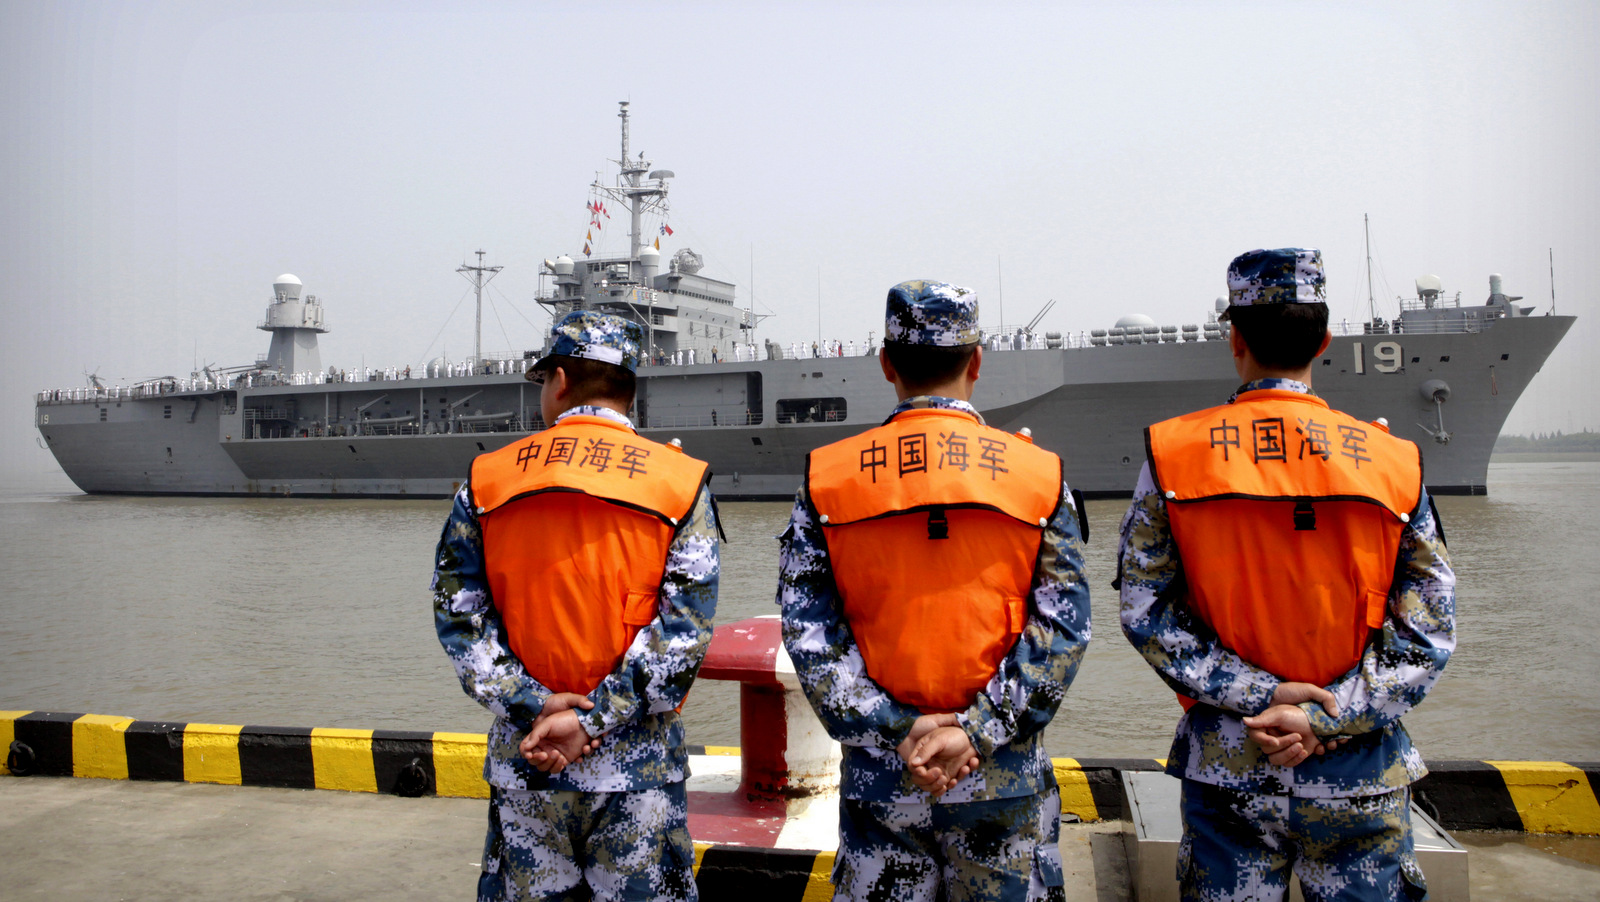 Soldiers from the Chinese People's Liberation Army (PLA) Navy watch as the USS Blue Ridge arrives at a port in Shanghai, Friday, May 6, 2016. (AP Photo)